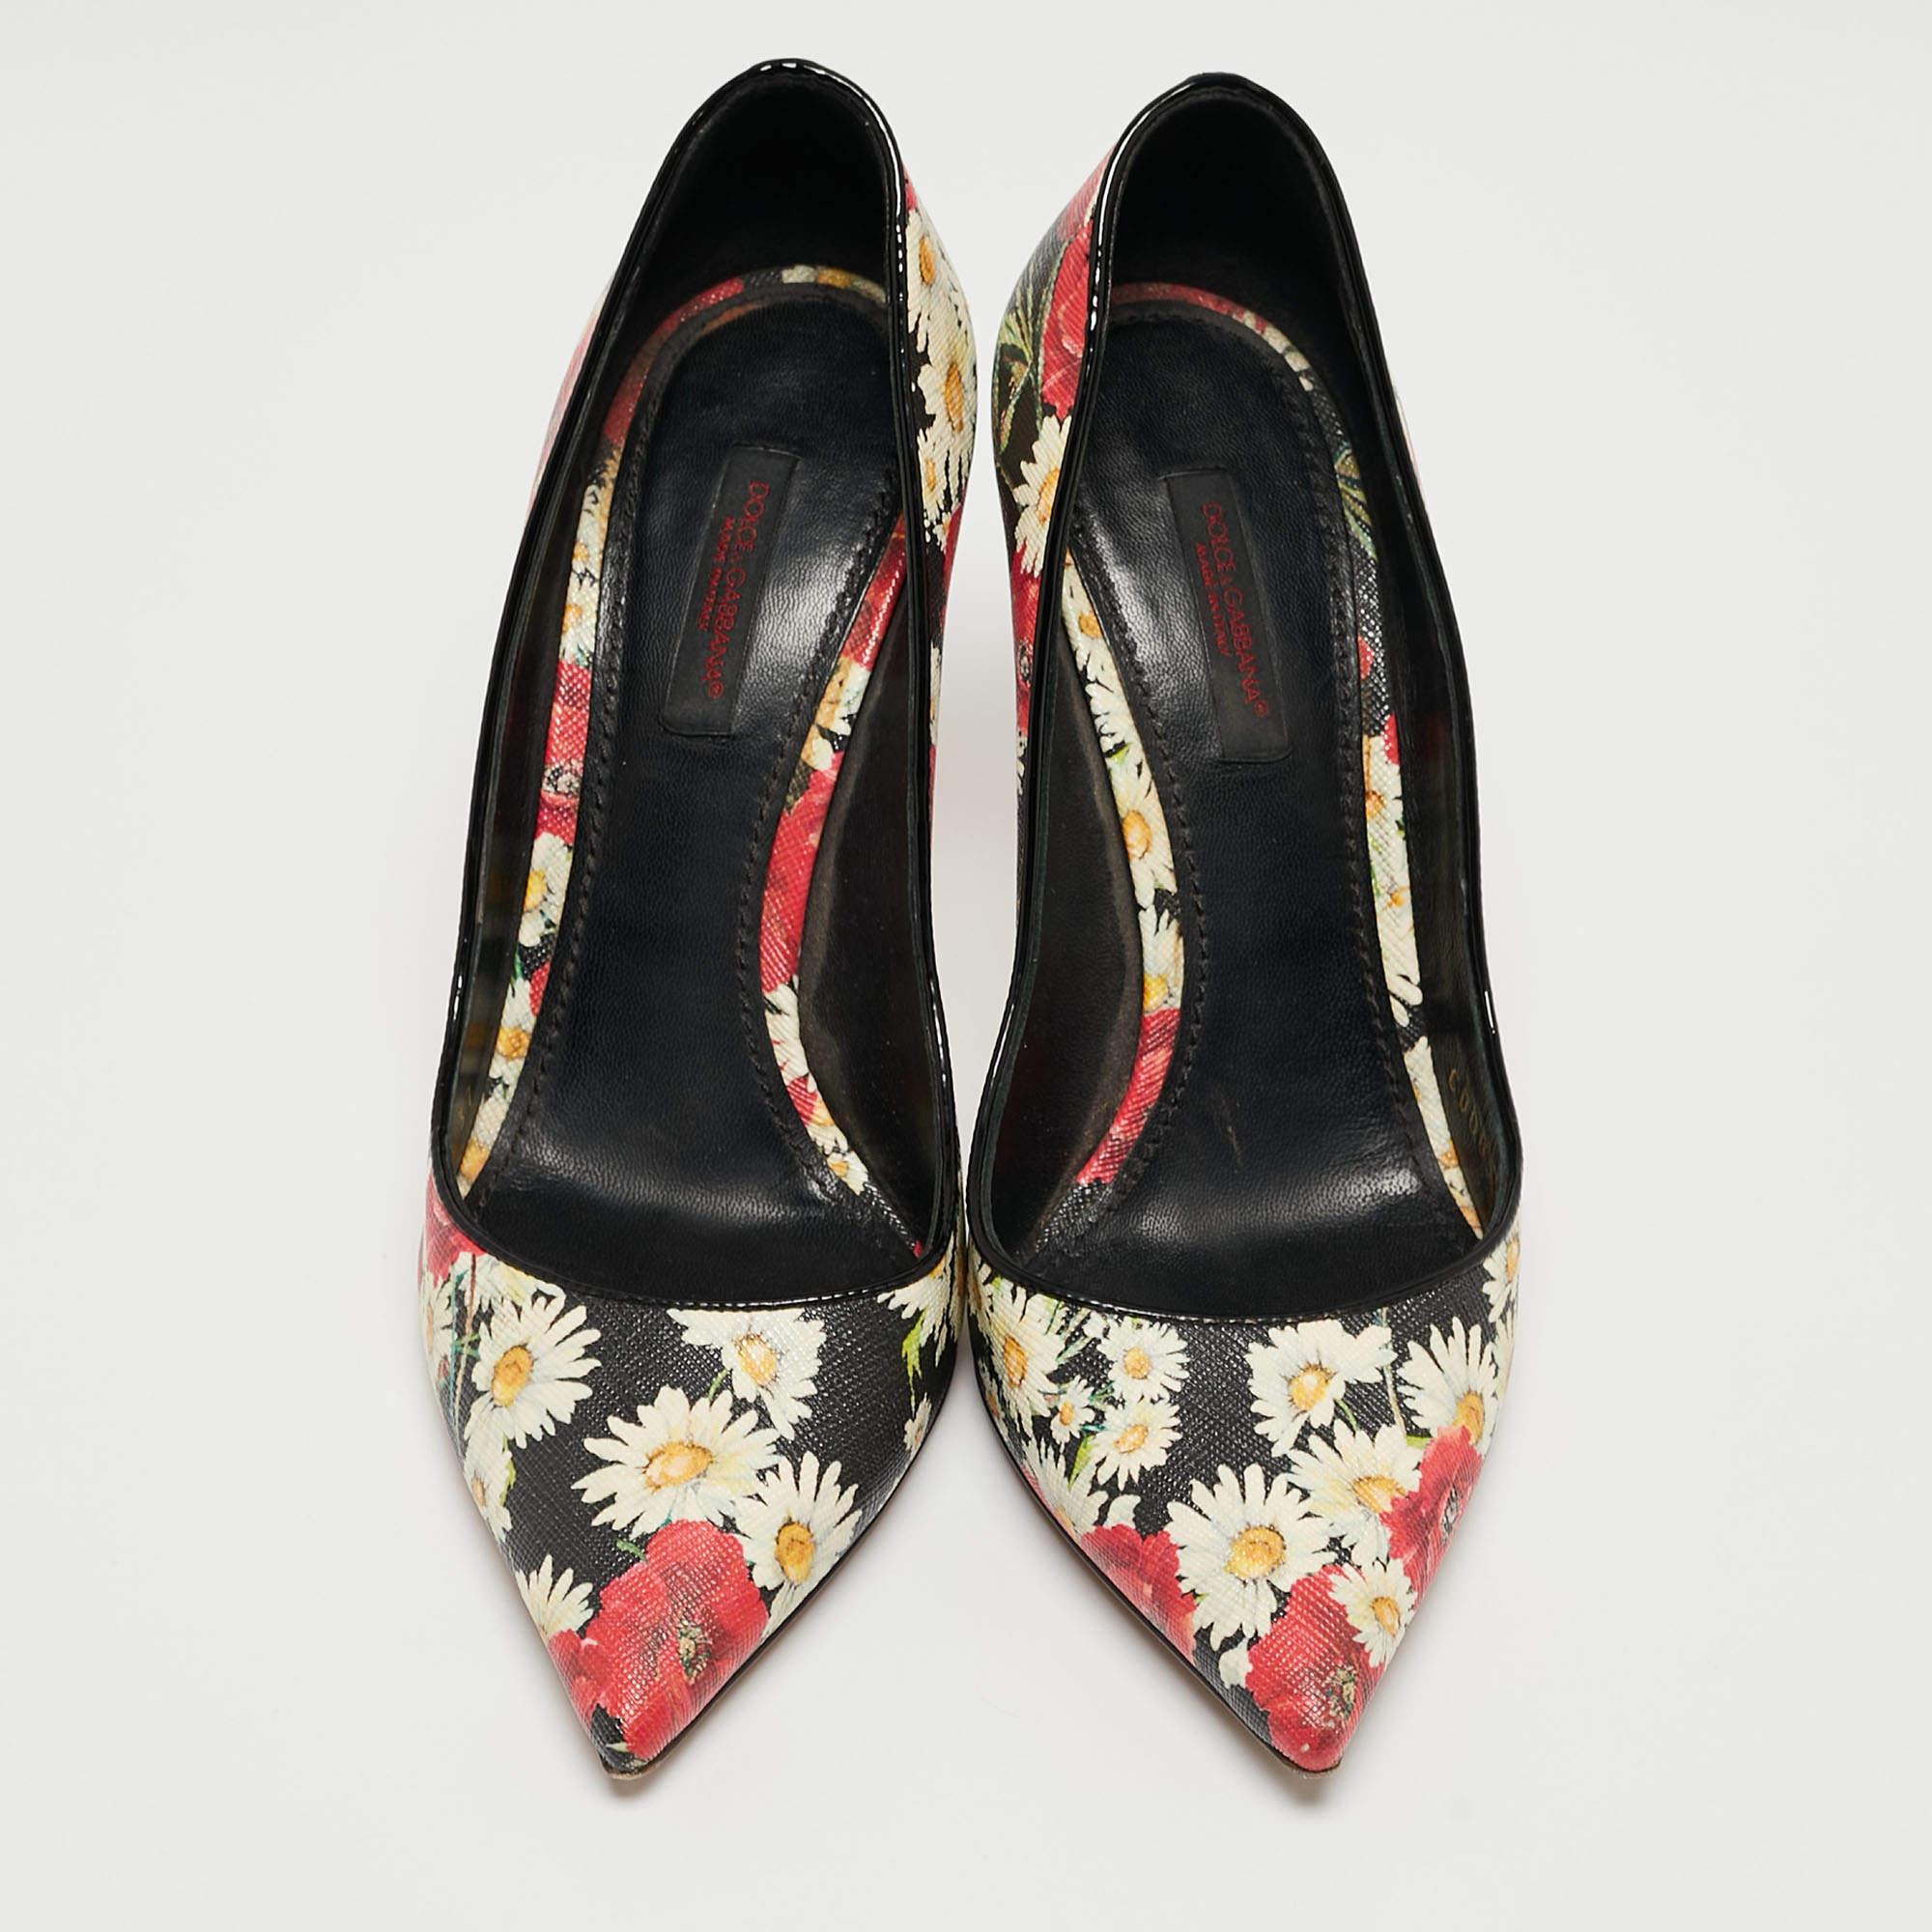 Dolce & Gabbana's collections are a testament to the label's opulent and glamorous aesthetics. These pumps are crafted from leather and are detailed with floral prints all over. They are finished off with tall slender heels and pointed toes.

